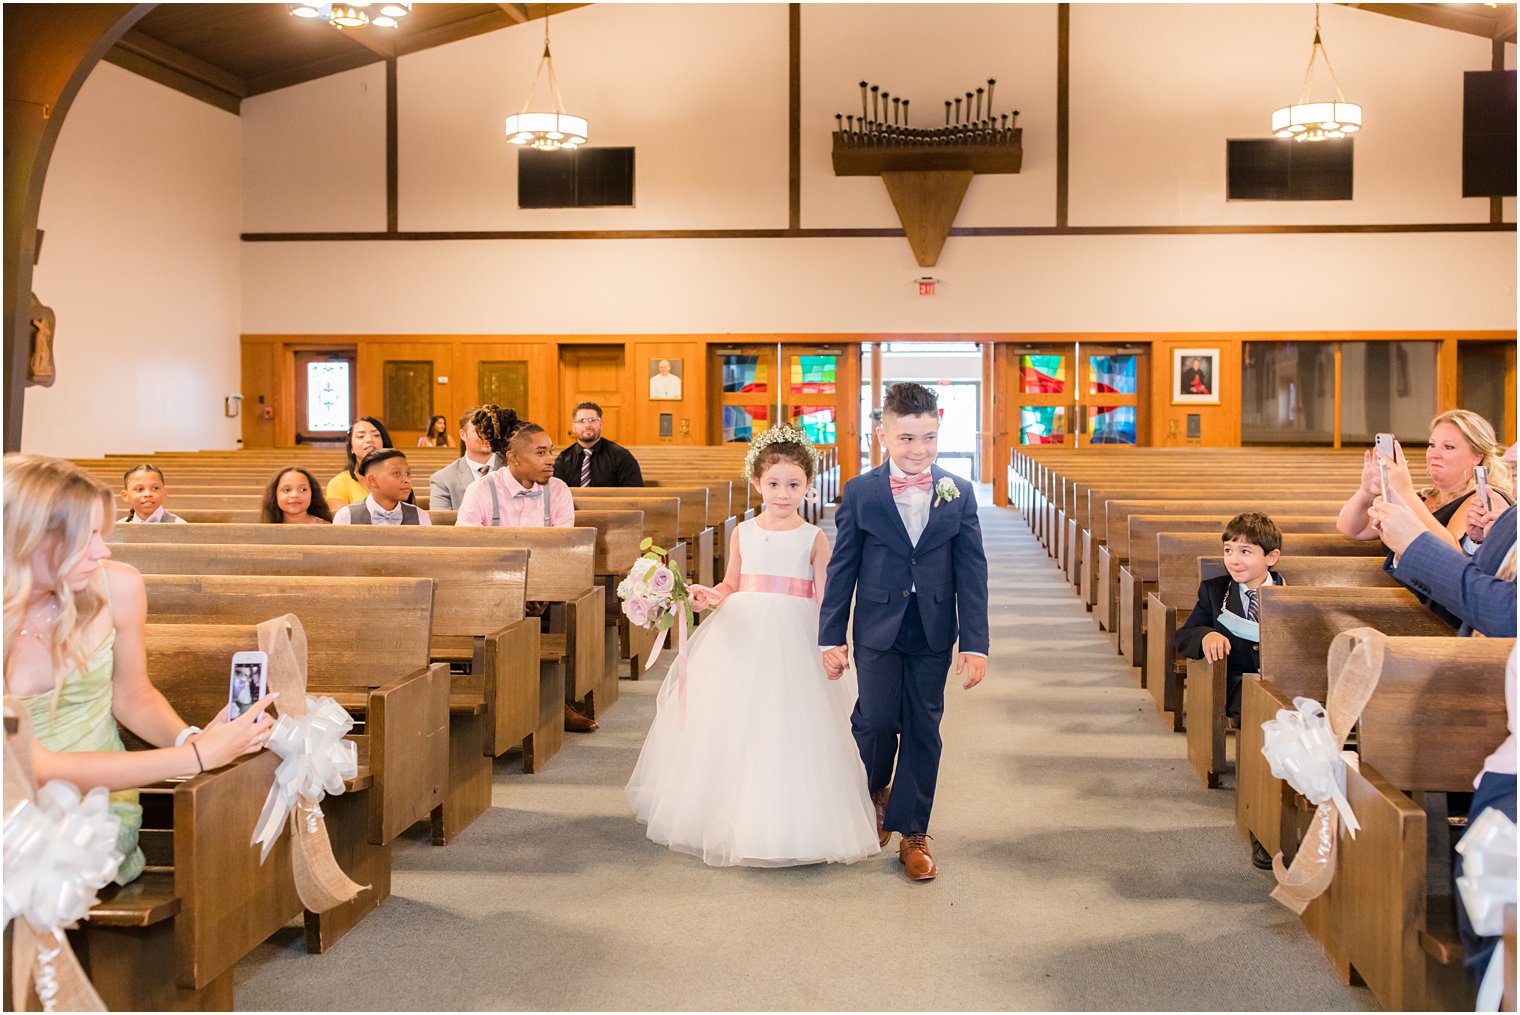 bride and groom's children walk down aisle as flower girl and ring bearer for traditional wedding ceremony at Saint Matthew the Apostle church